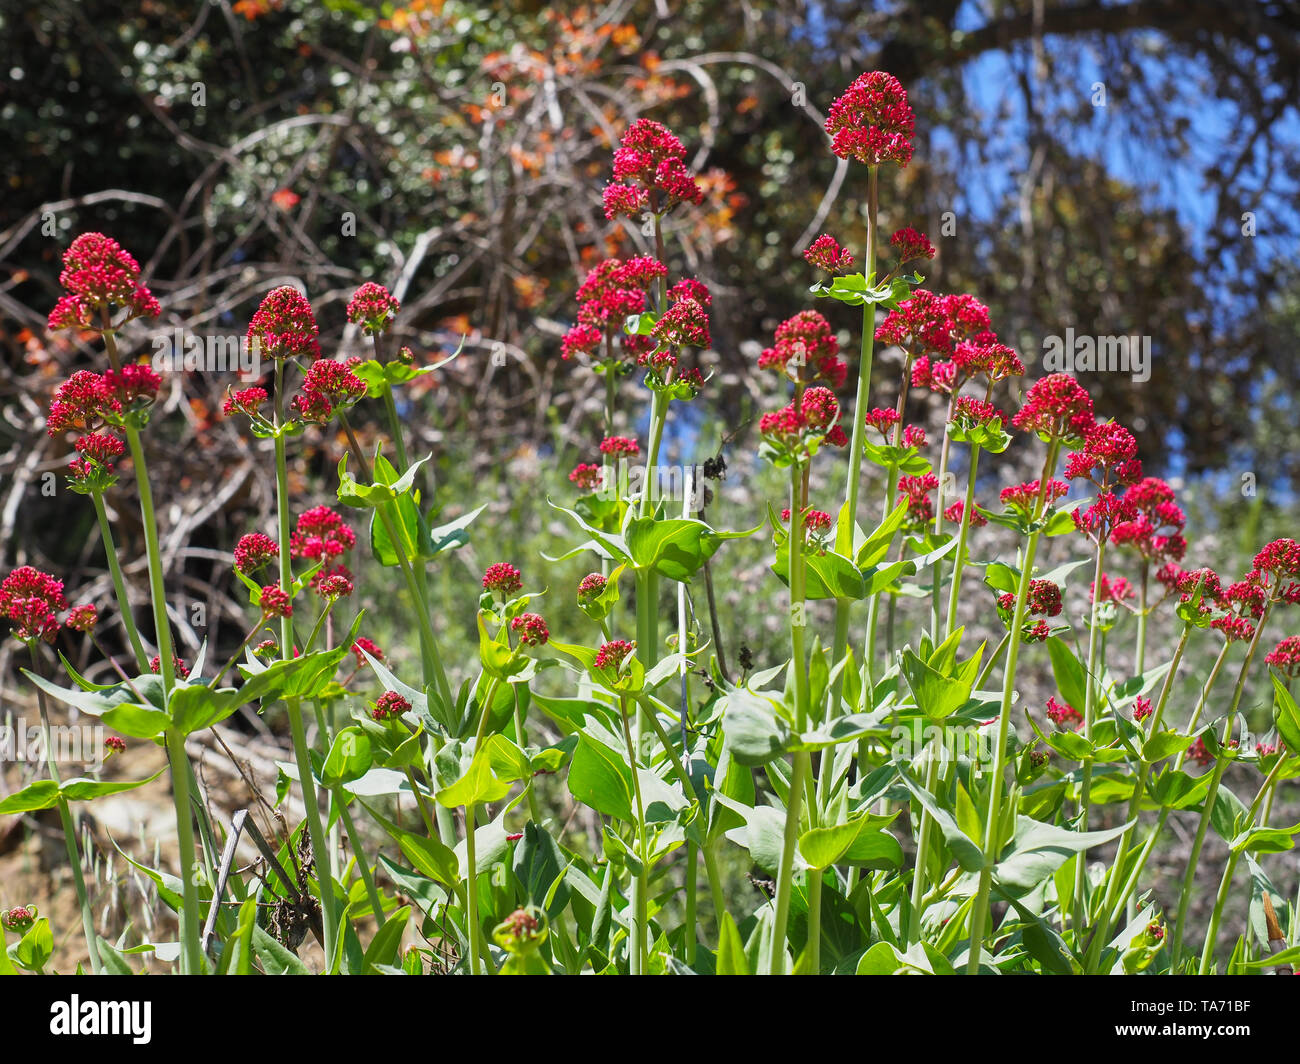 Centranthus ruber is a popular garden plant grown for its ornamental flowers. Red Valerian or Jupiters Beard - Longest blooming perennial plant. Stock Photo